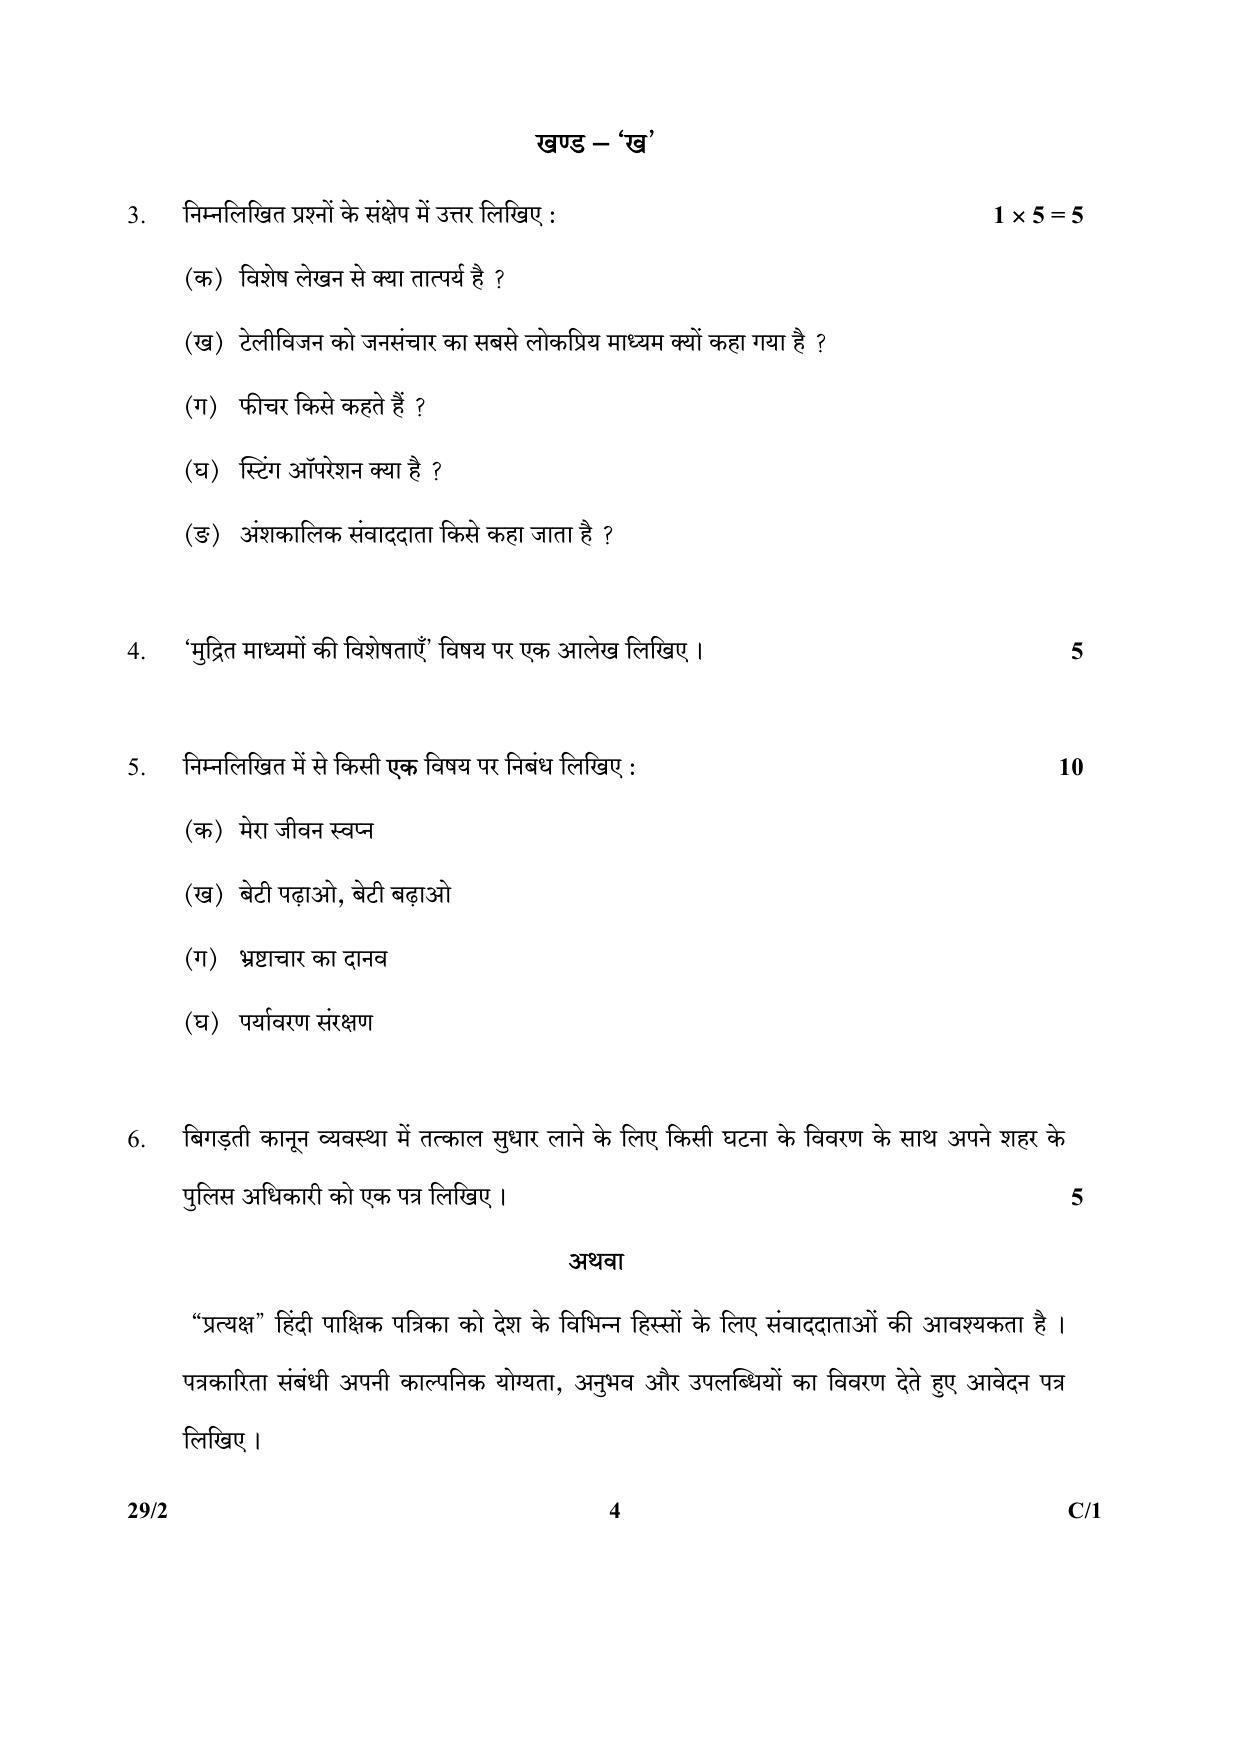 CBSE Class 12 29-2 (Hindi Elective) 2018 Compartment Question Paper - Page 4